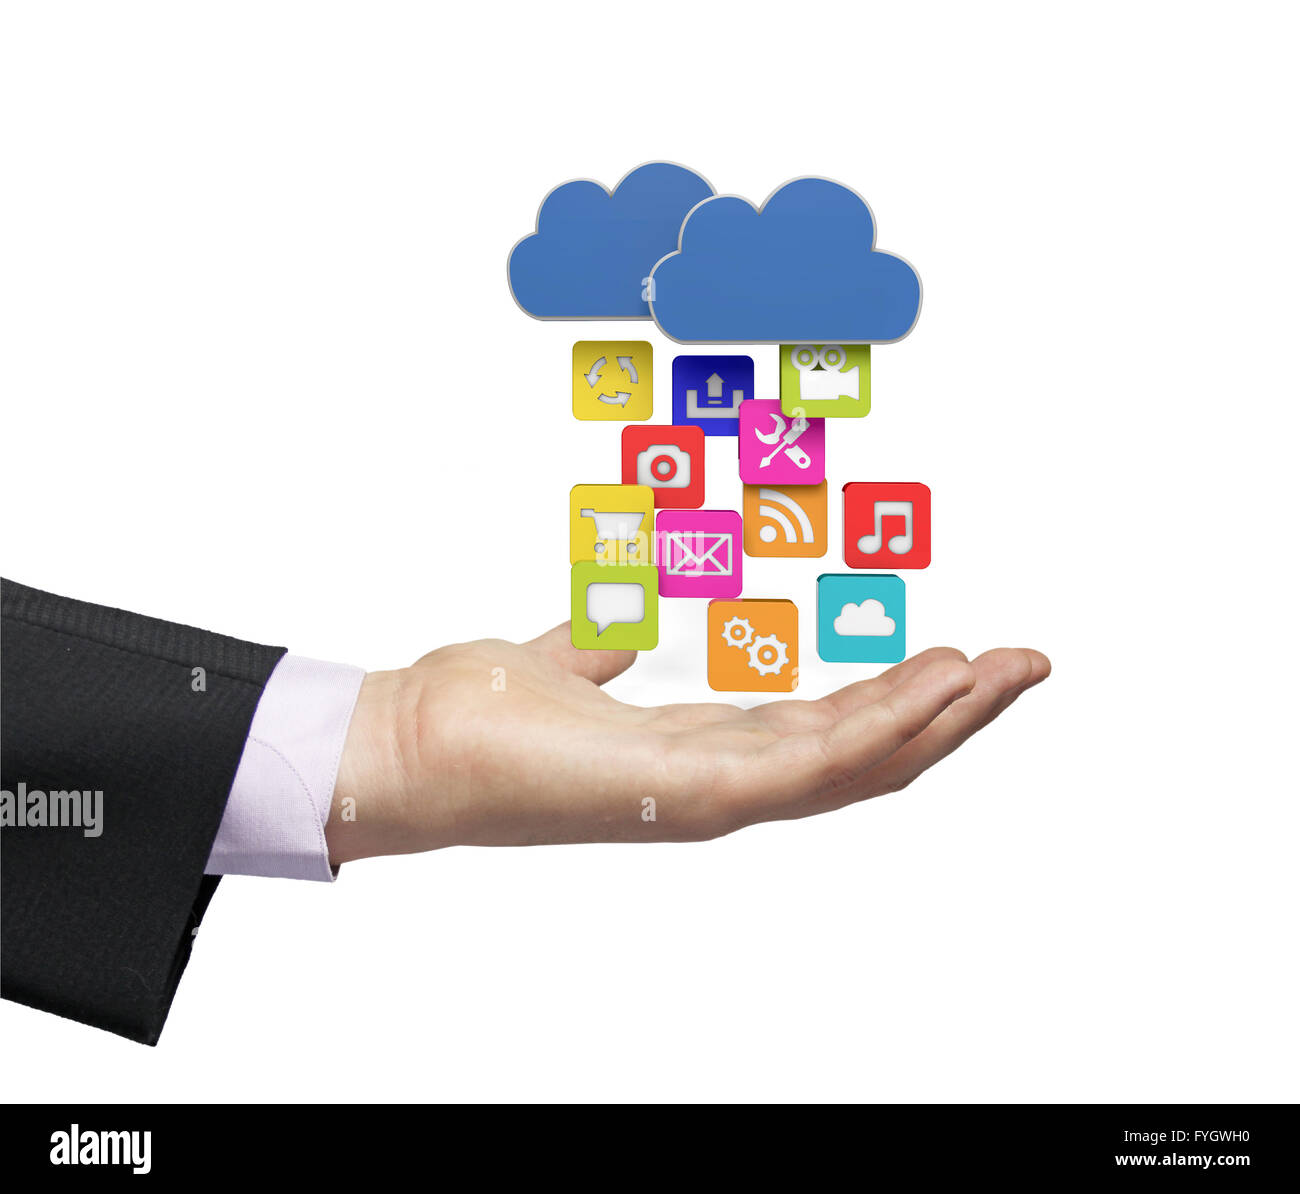 apps download from the cloud over a businessman hand Stock Photo